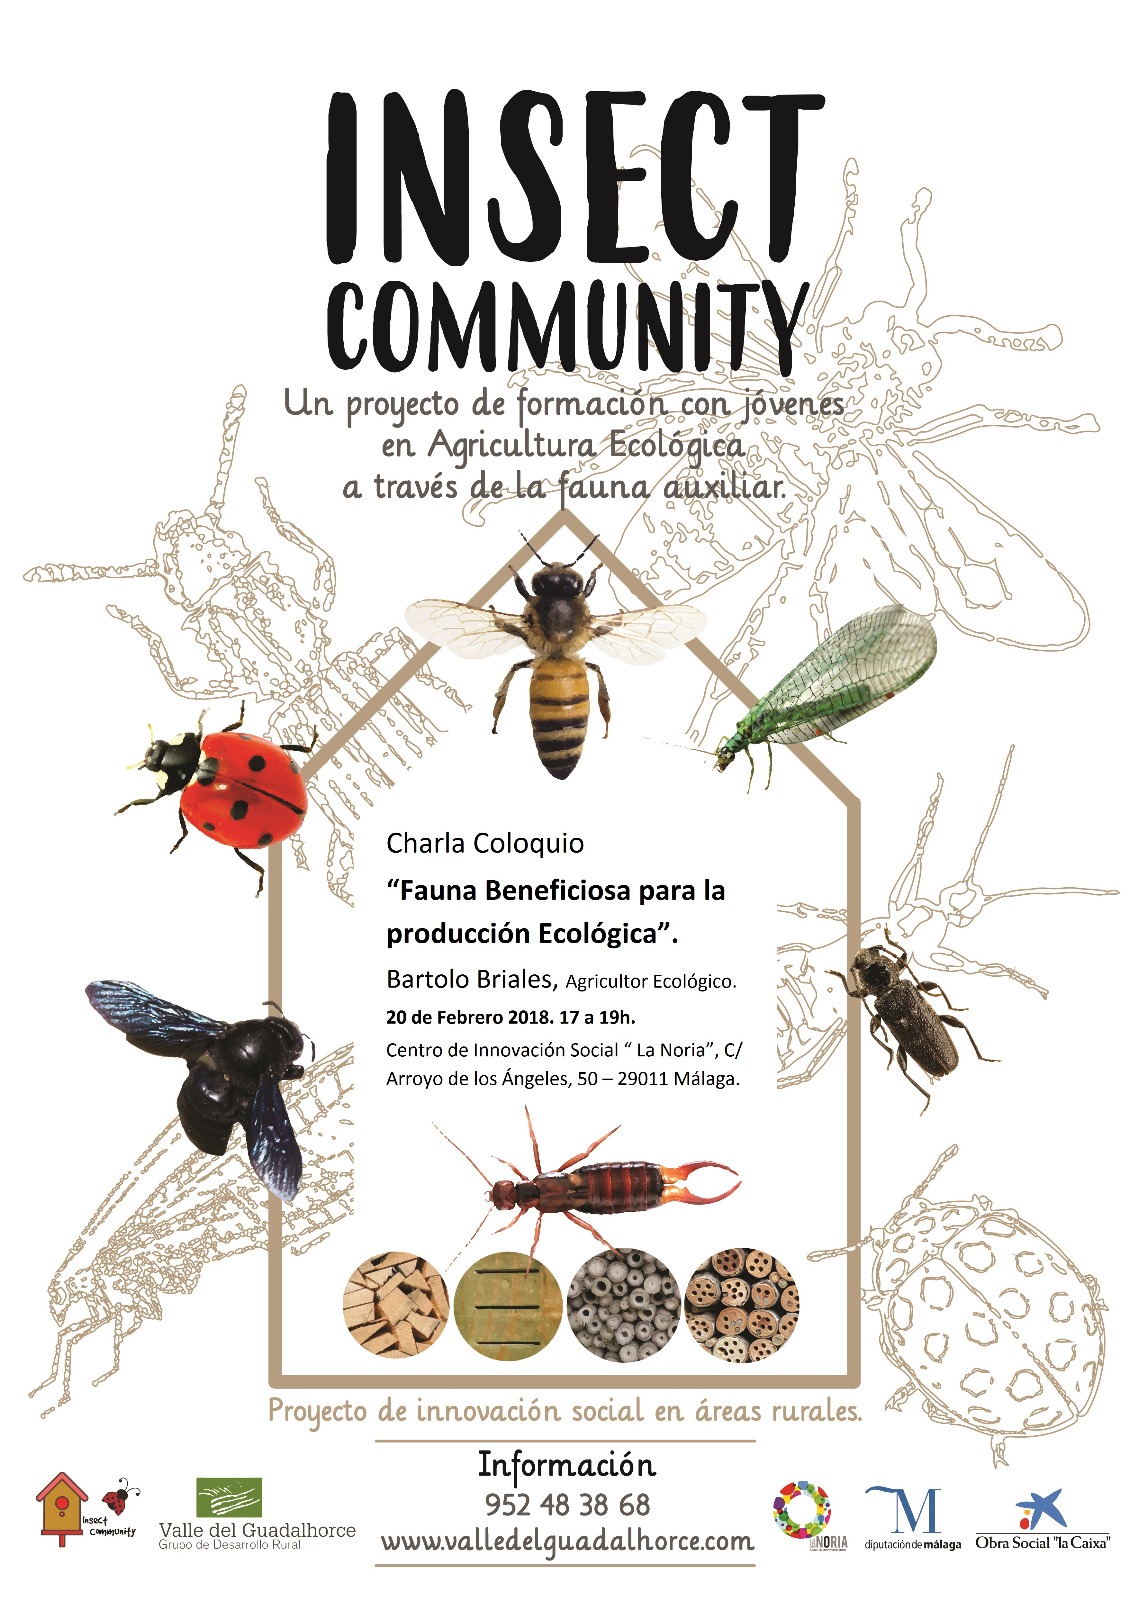 Insect Community